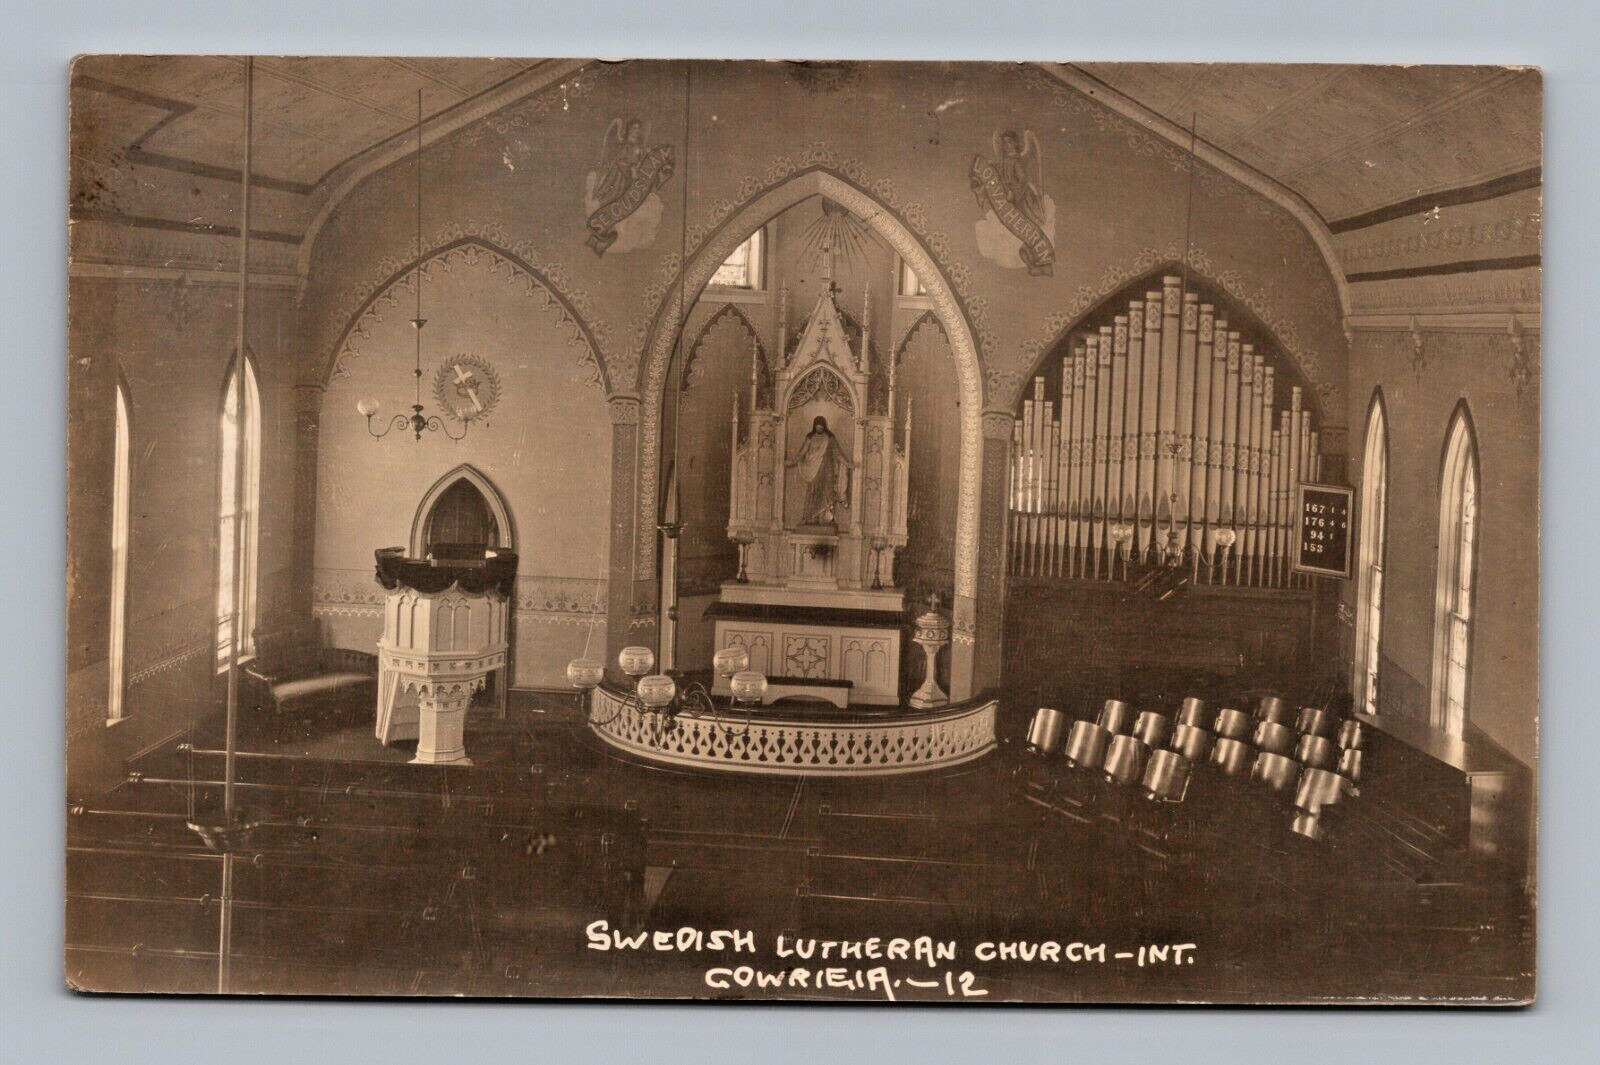 COWRIE IA OLD VIEW OF INTERIOR OF THE SWEDISH LUTHERAN CHURCH POSTCARD (H-33)